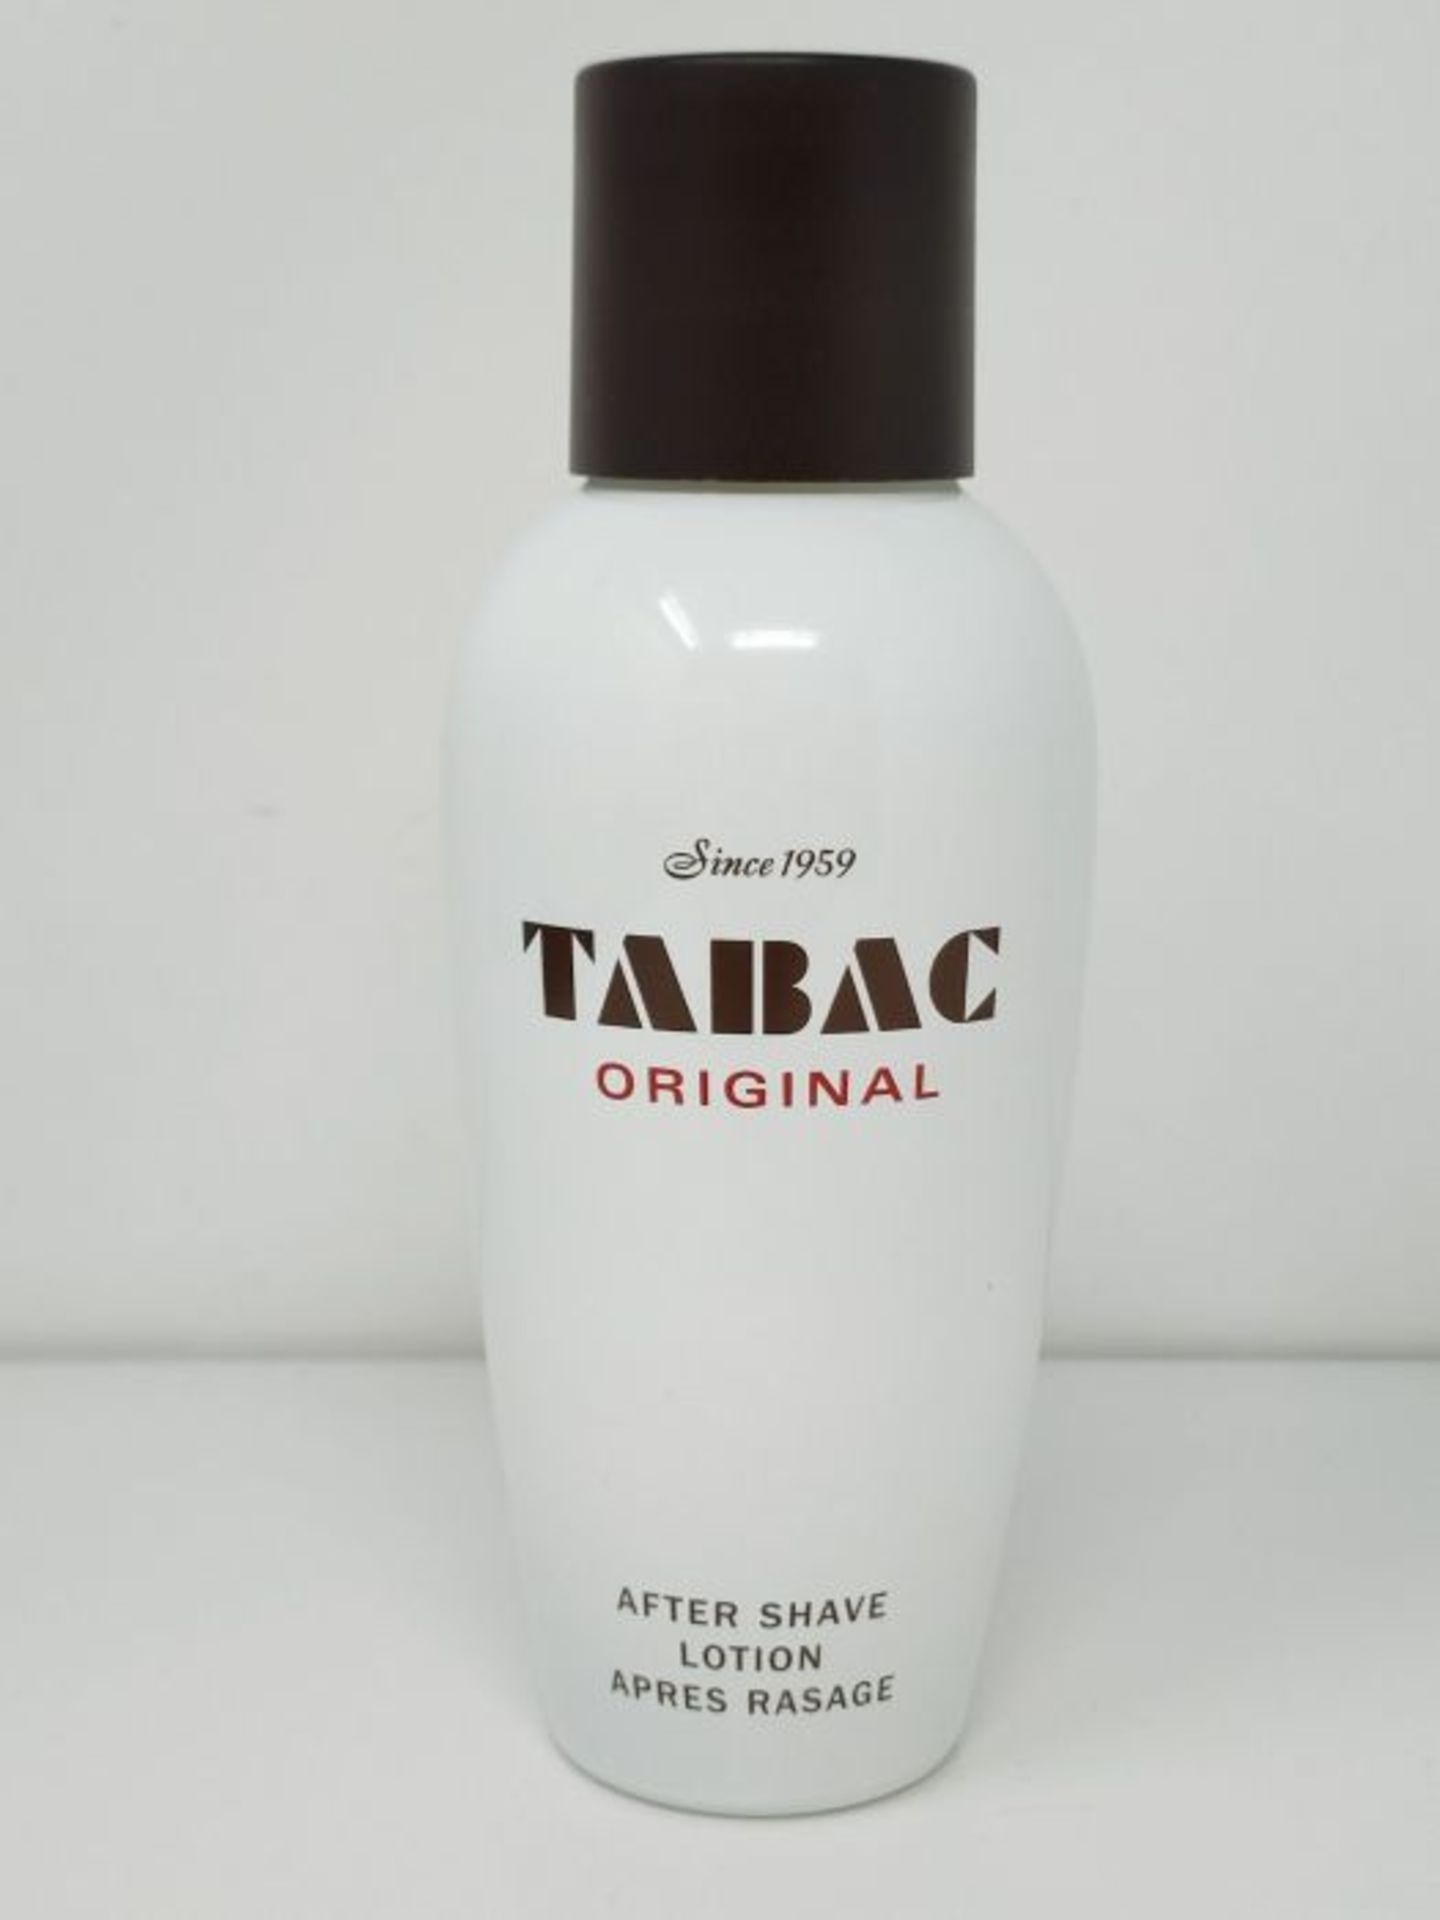 Tabac® Original I After Shave Lotion - Original Since 1959 - invigorates, cools and r - Image 3 of 4